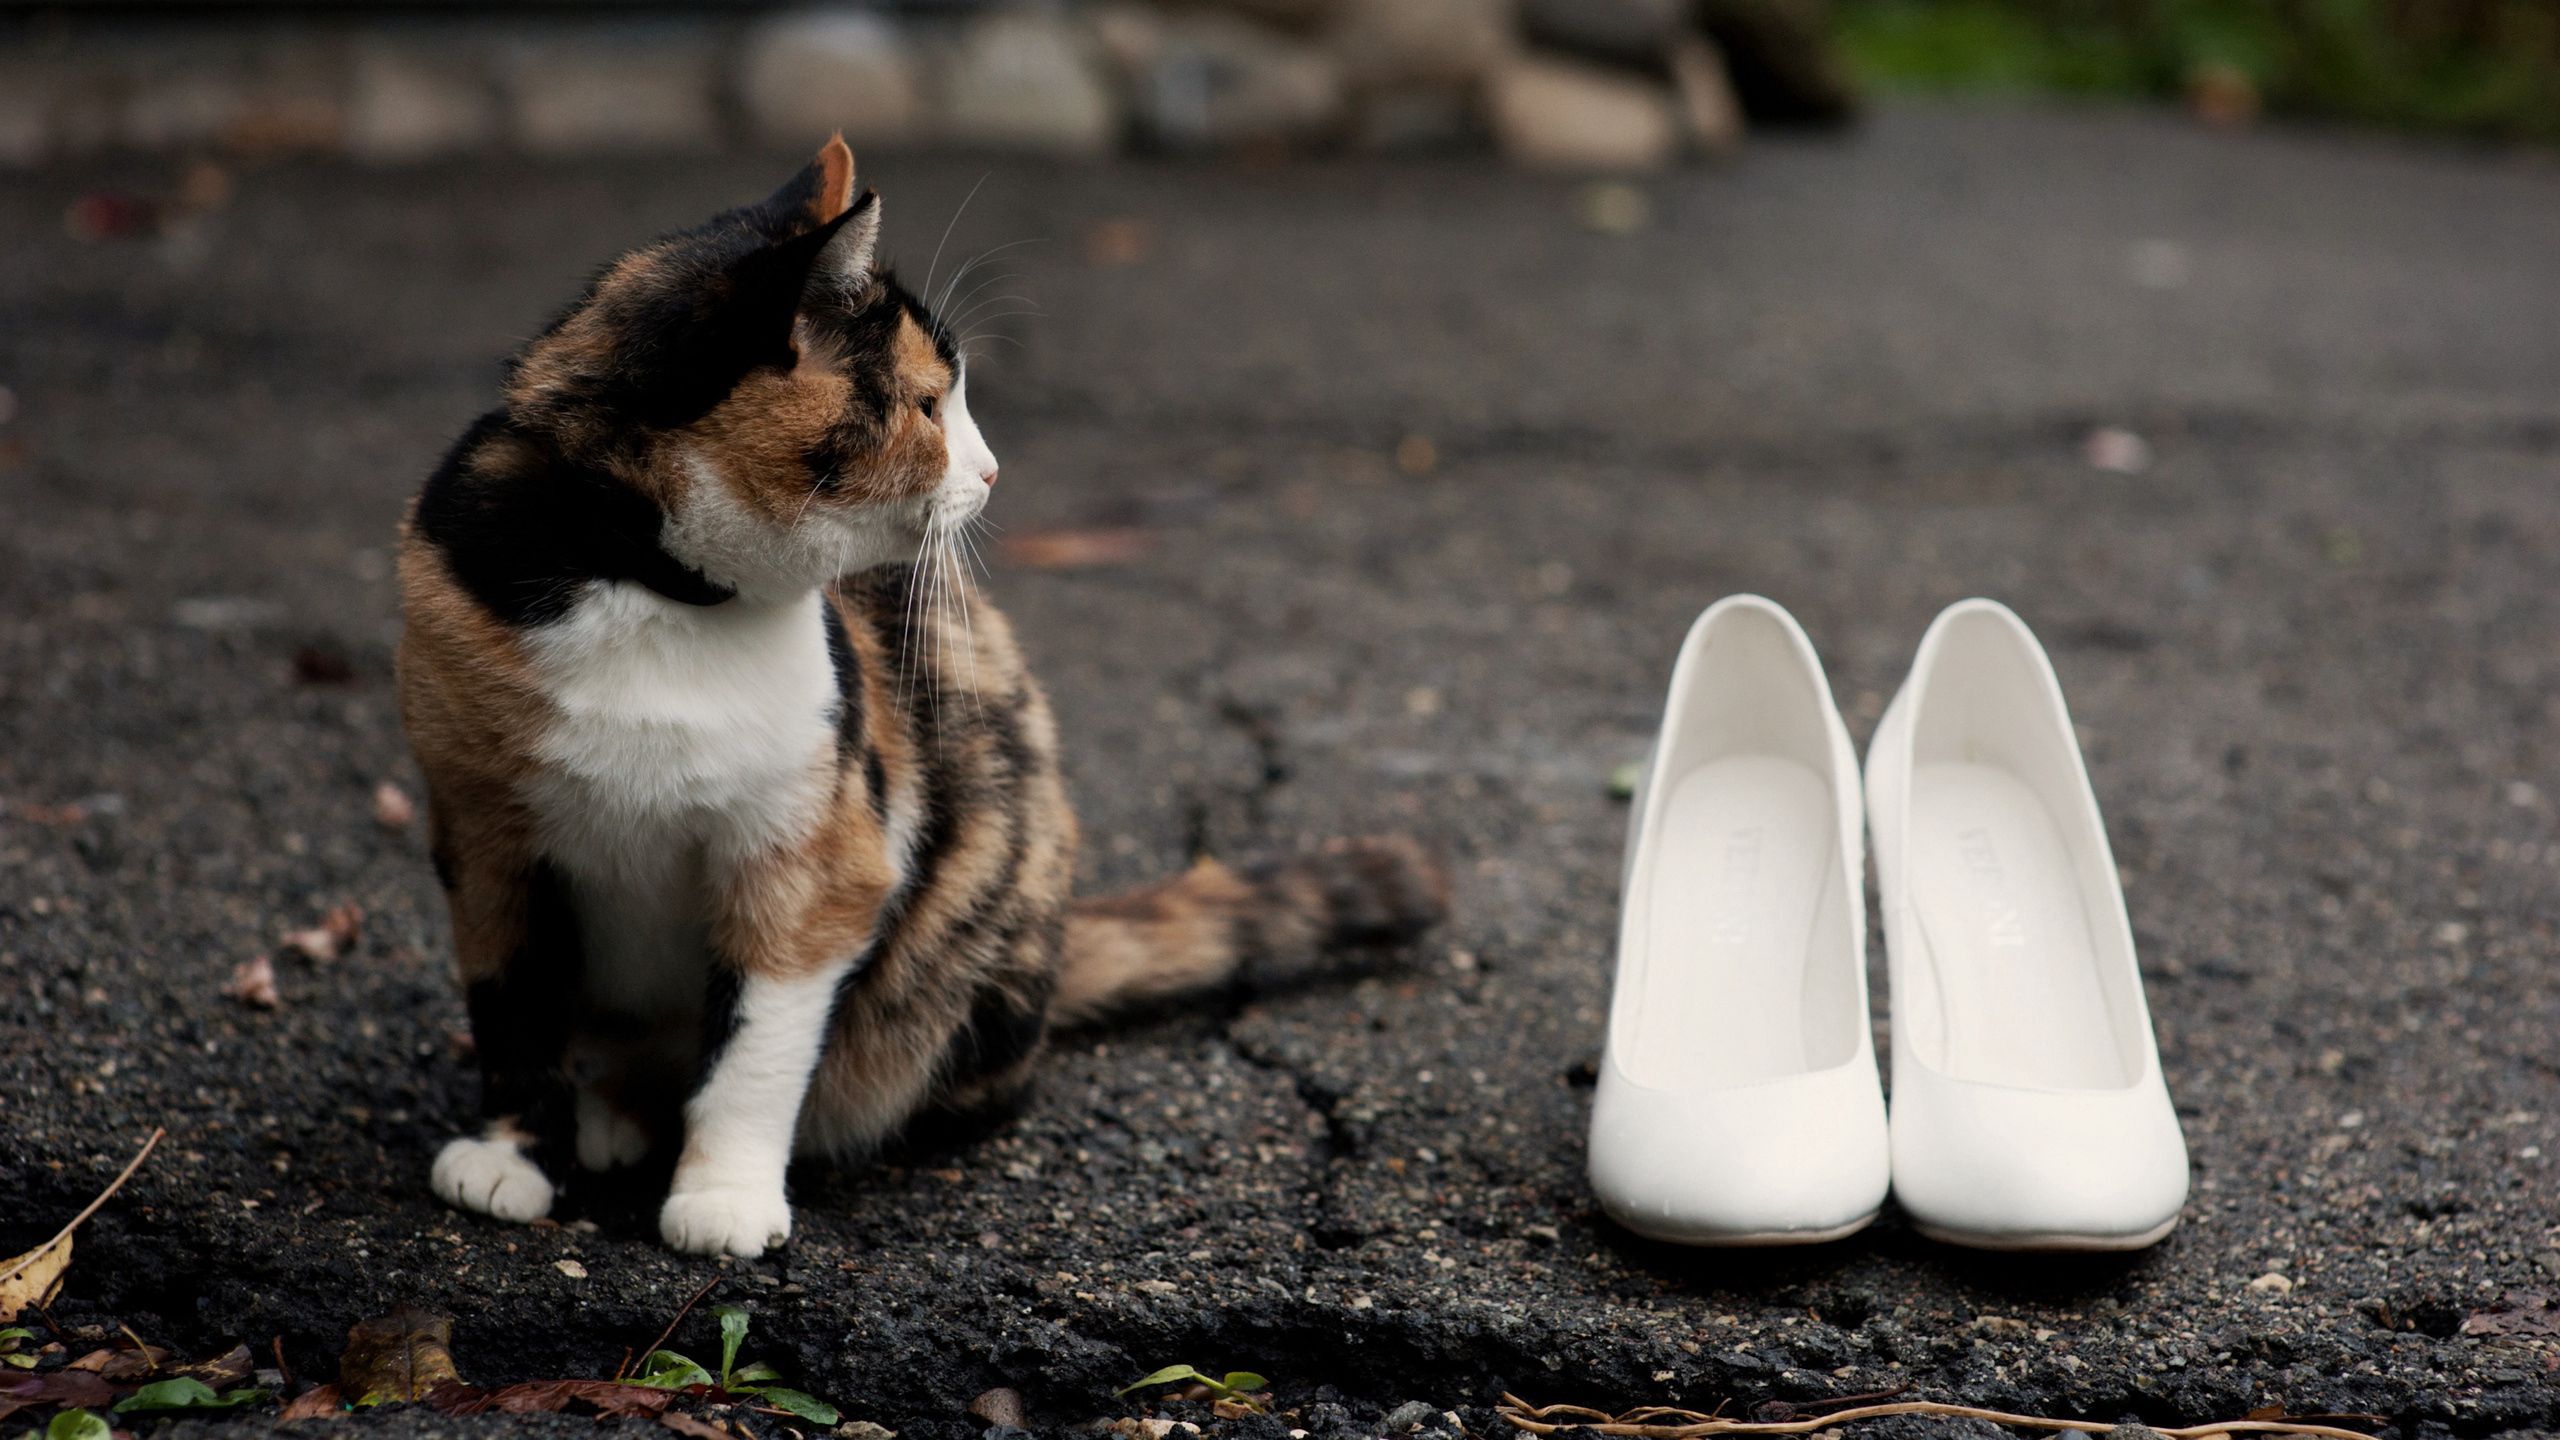 spotted, animals, road, cat, spotty, shoes